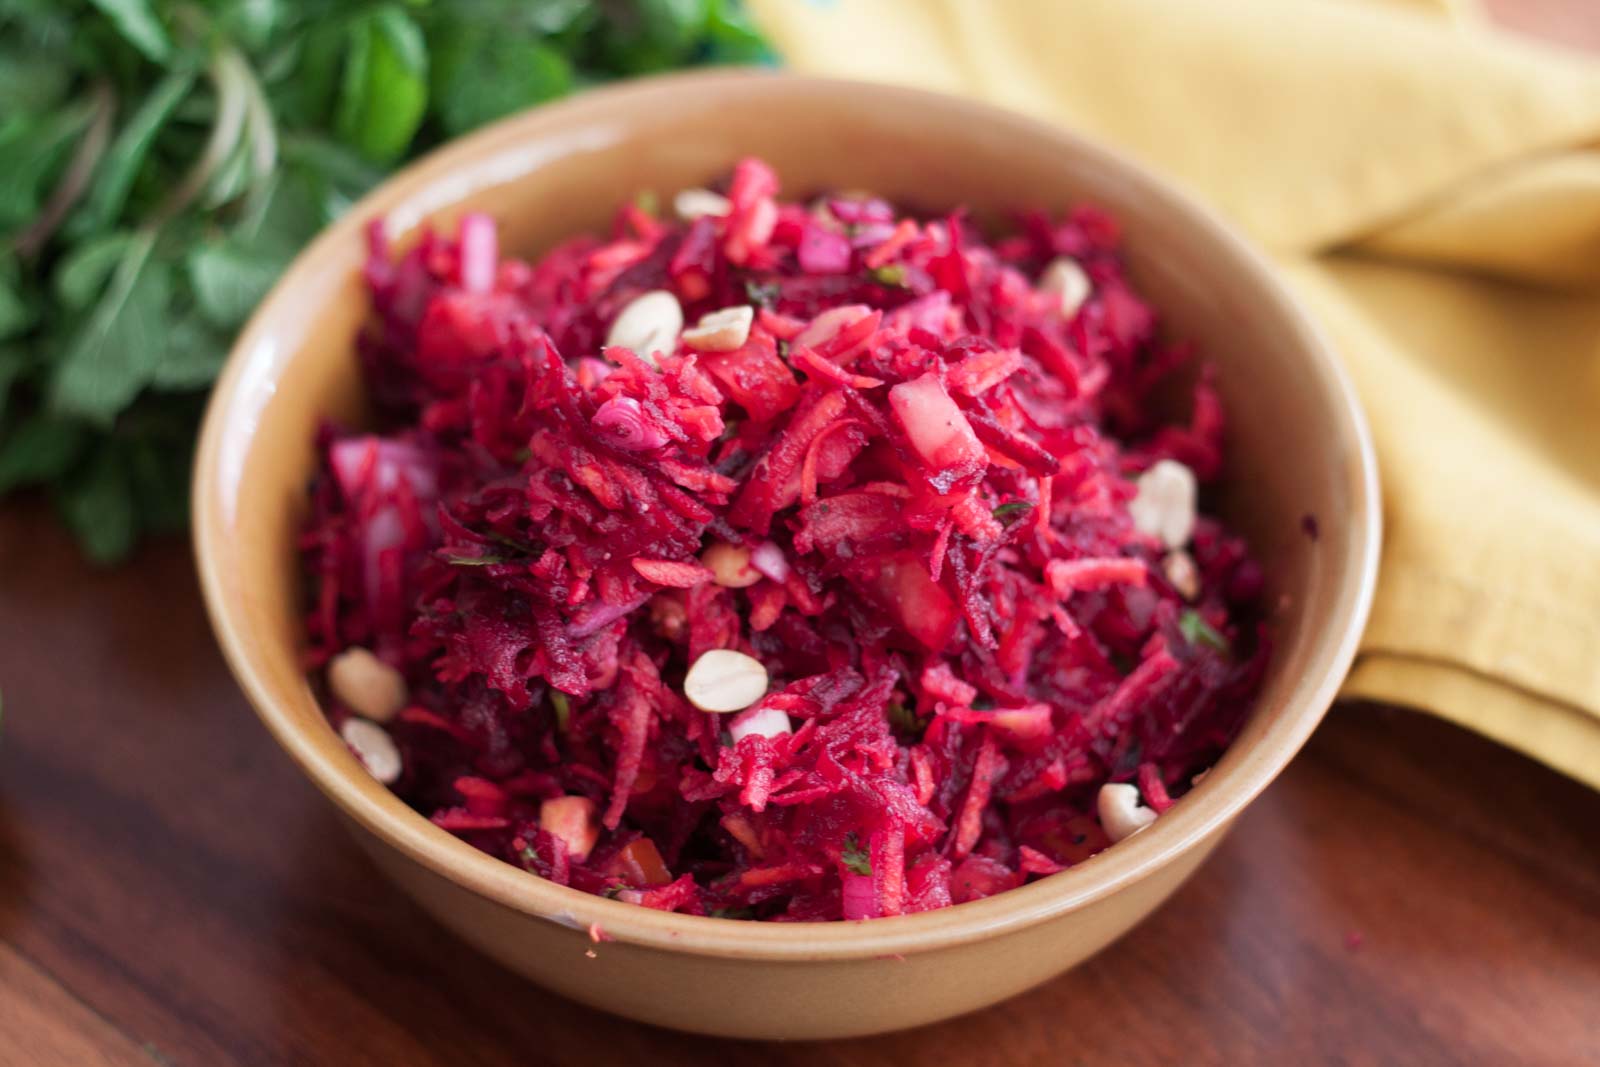 Beetroot carrot and cucumber salad